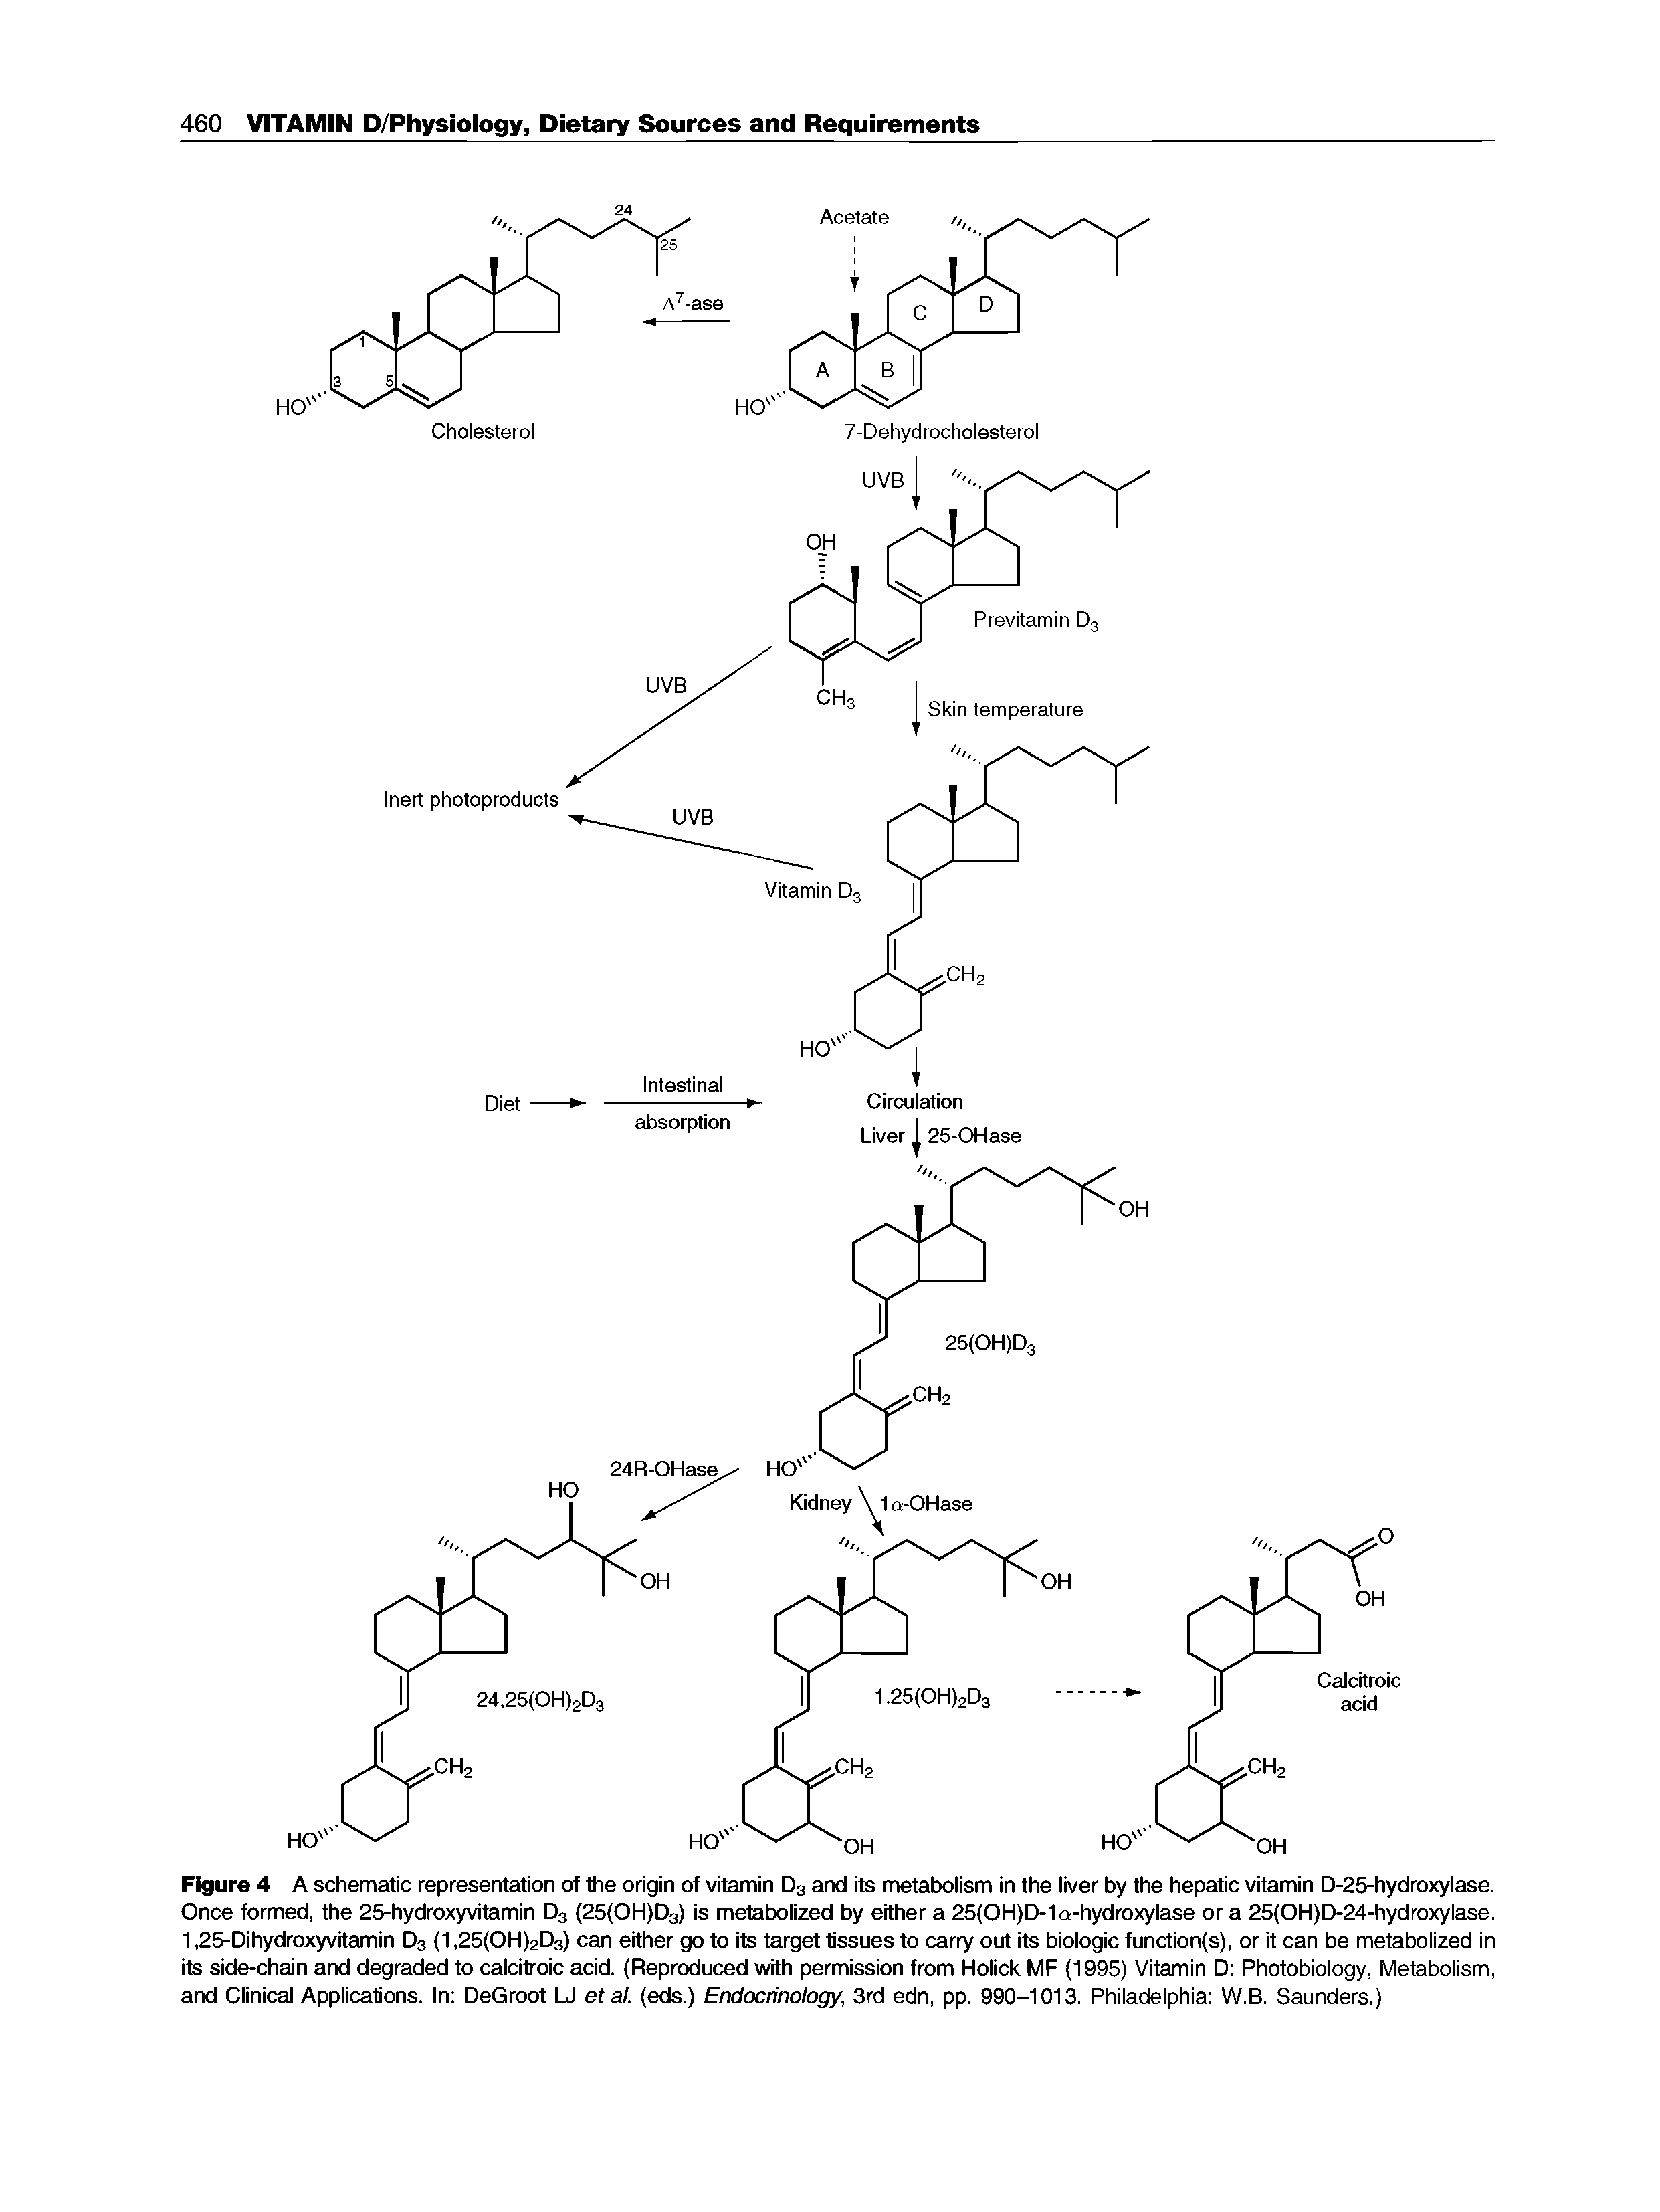 Figure 4 A schematic representation of the origin of vitamin D3 and its metabolism in the liver by the hepatic vitamin D-25-hydroxylase. Once formed, the 25-hydroxyvitamin D3 (25(OH)D3> is metabolized by either a 25(OH)D-1a-hydroxylase or a 25(OH)D-24-hydroxylase. 1,25-Dihydroxyvitamin D3 (1,25(OH)2D3) can either go to its target tissues to carry out its biologic functbn(s), or it can be metabolized in its side-chain and degraded to calcitroic add. (Reproduced with permissbn from Holick MF (1995) Vitamin D Photobiology, Metabolism, and Clinical Applications. In DeGroot U etal. (eds.) Endocrinology, 3rd edn, pp. 990-1013. Philadelphia W.B. Saunders.)...